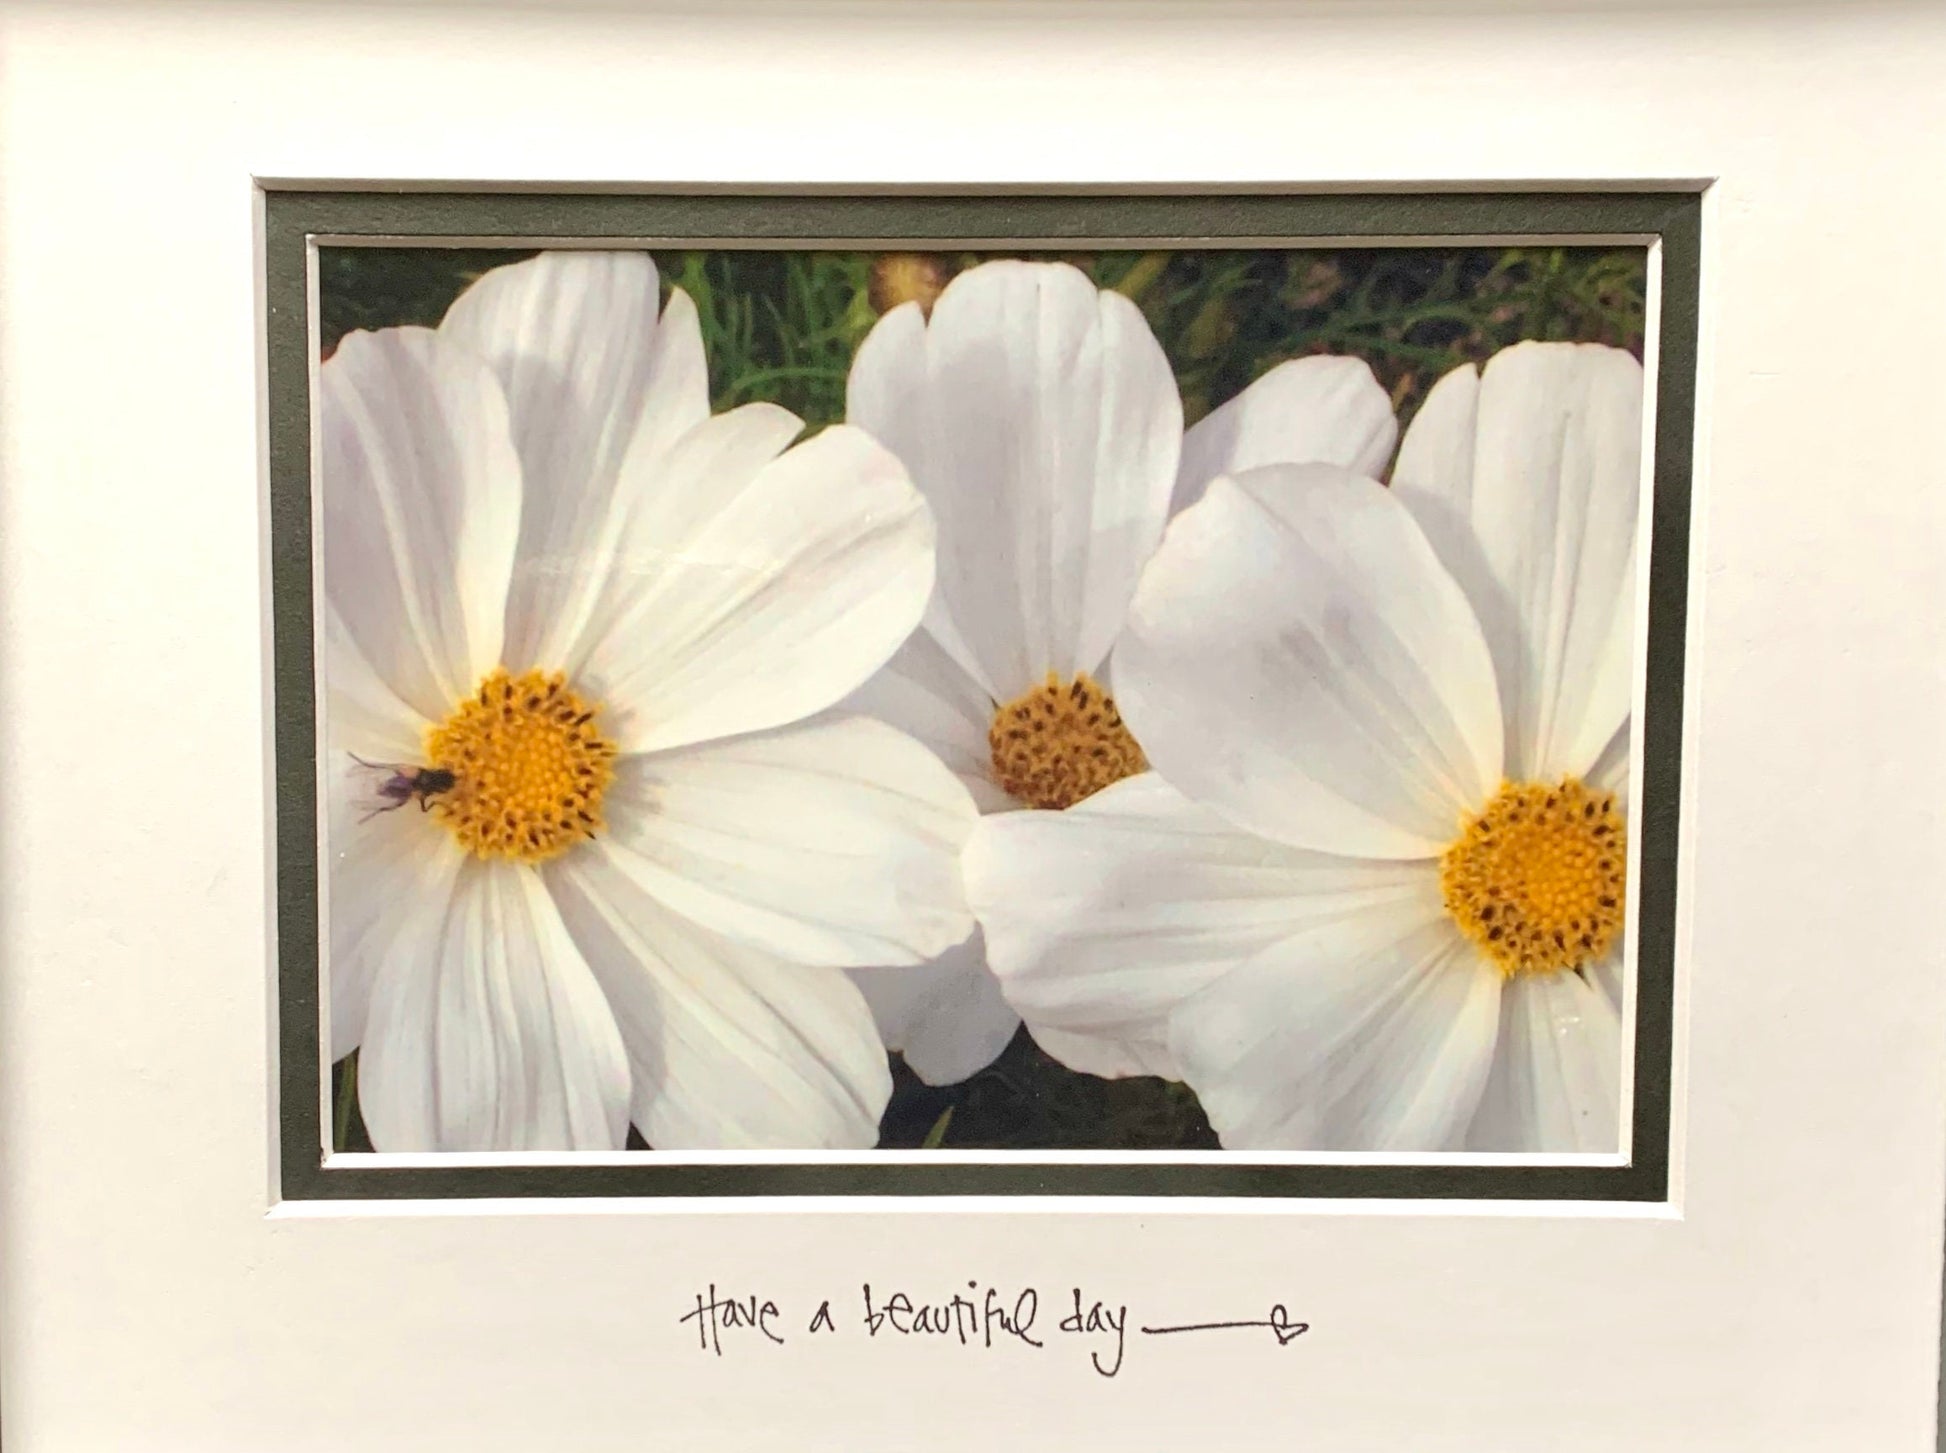 White Daisies Inspirational Quote Matted Photo Original Flower Photography Colorful decor Garden Nature accent flower lover gift